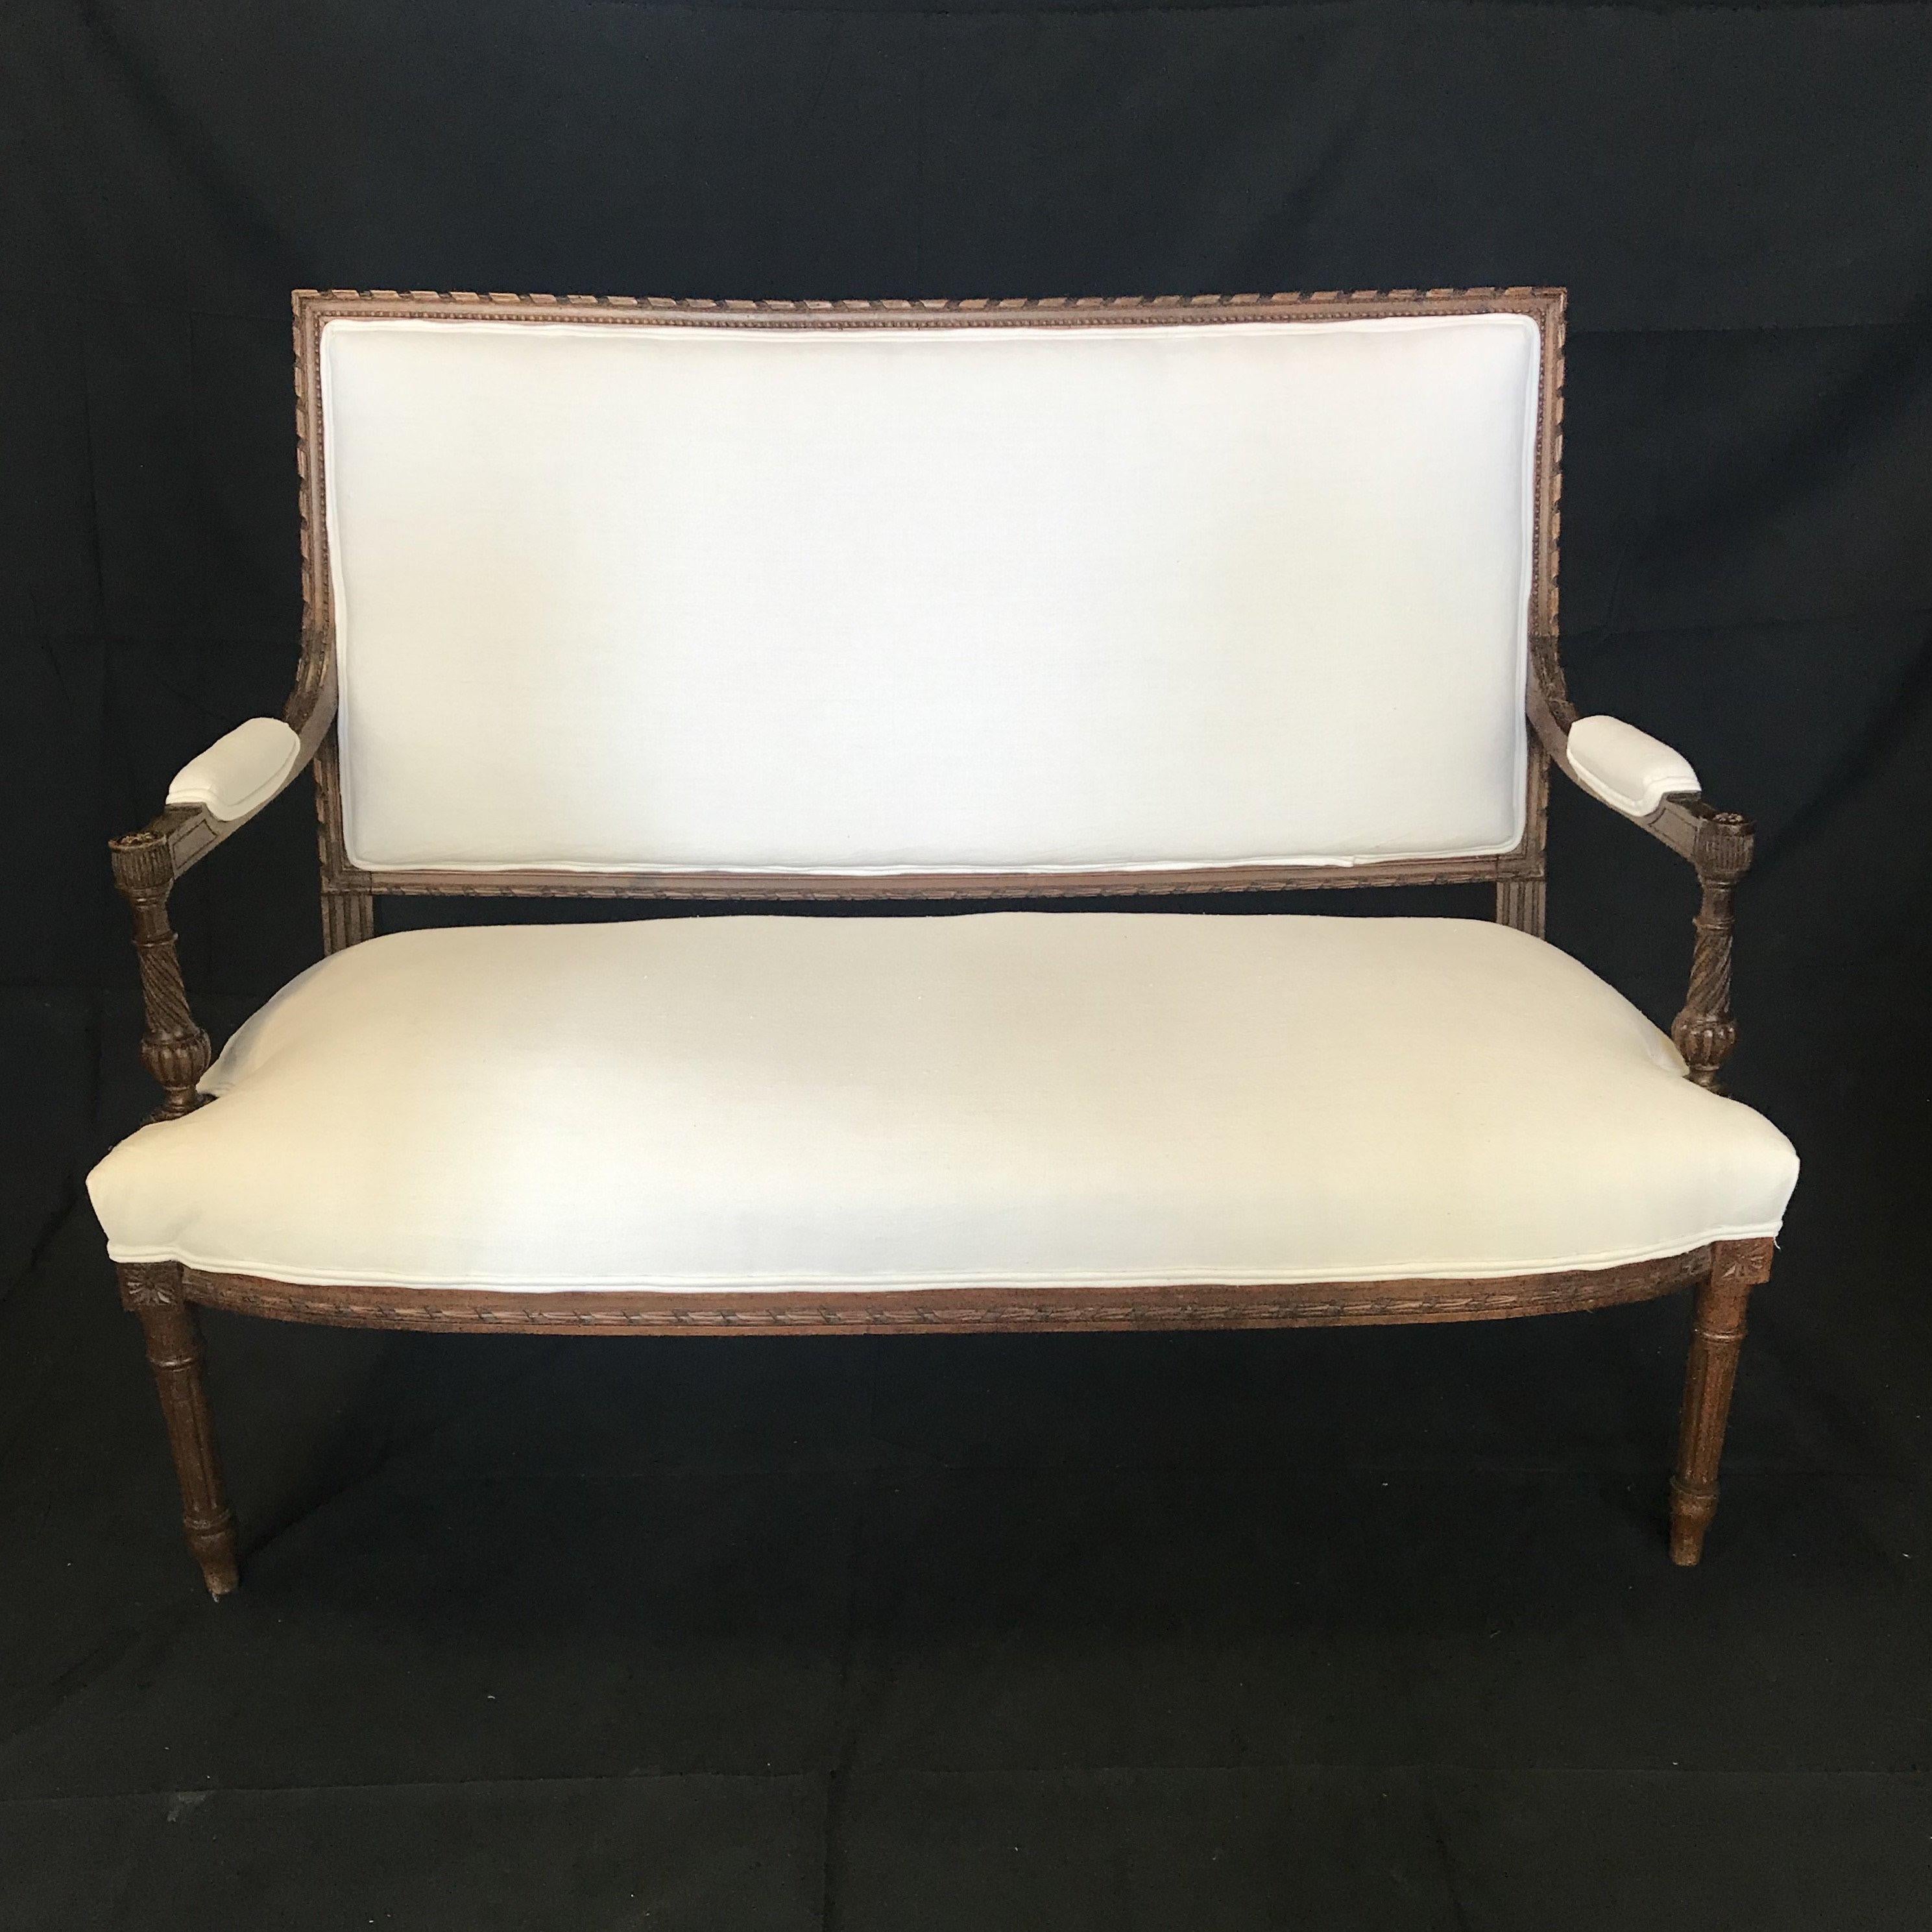 Very elegant sophisticated French Louis XVI carved 5-piece salon set including square back loveseat, 2 armchairs with open arm rests, and 2 side chairs. All are reupholstered in immaculate vintage French linen cotton sheet material. The carved